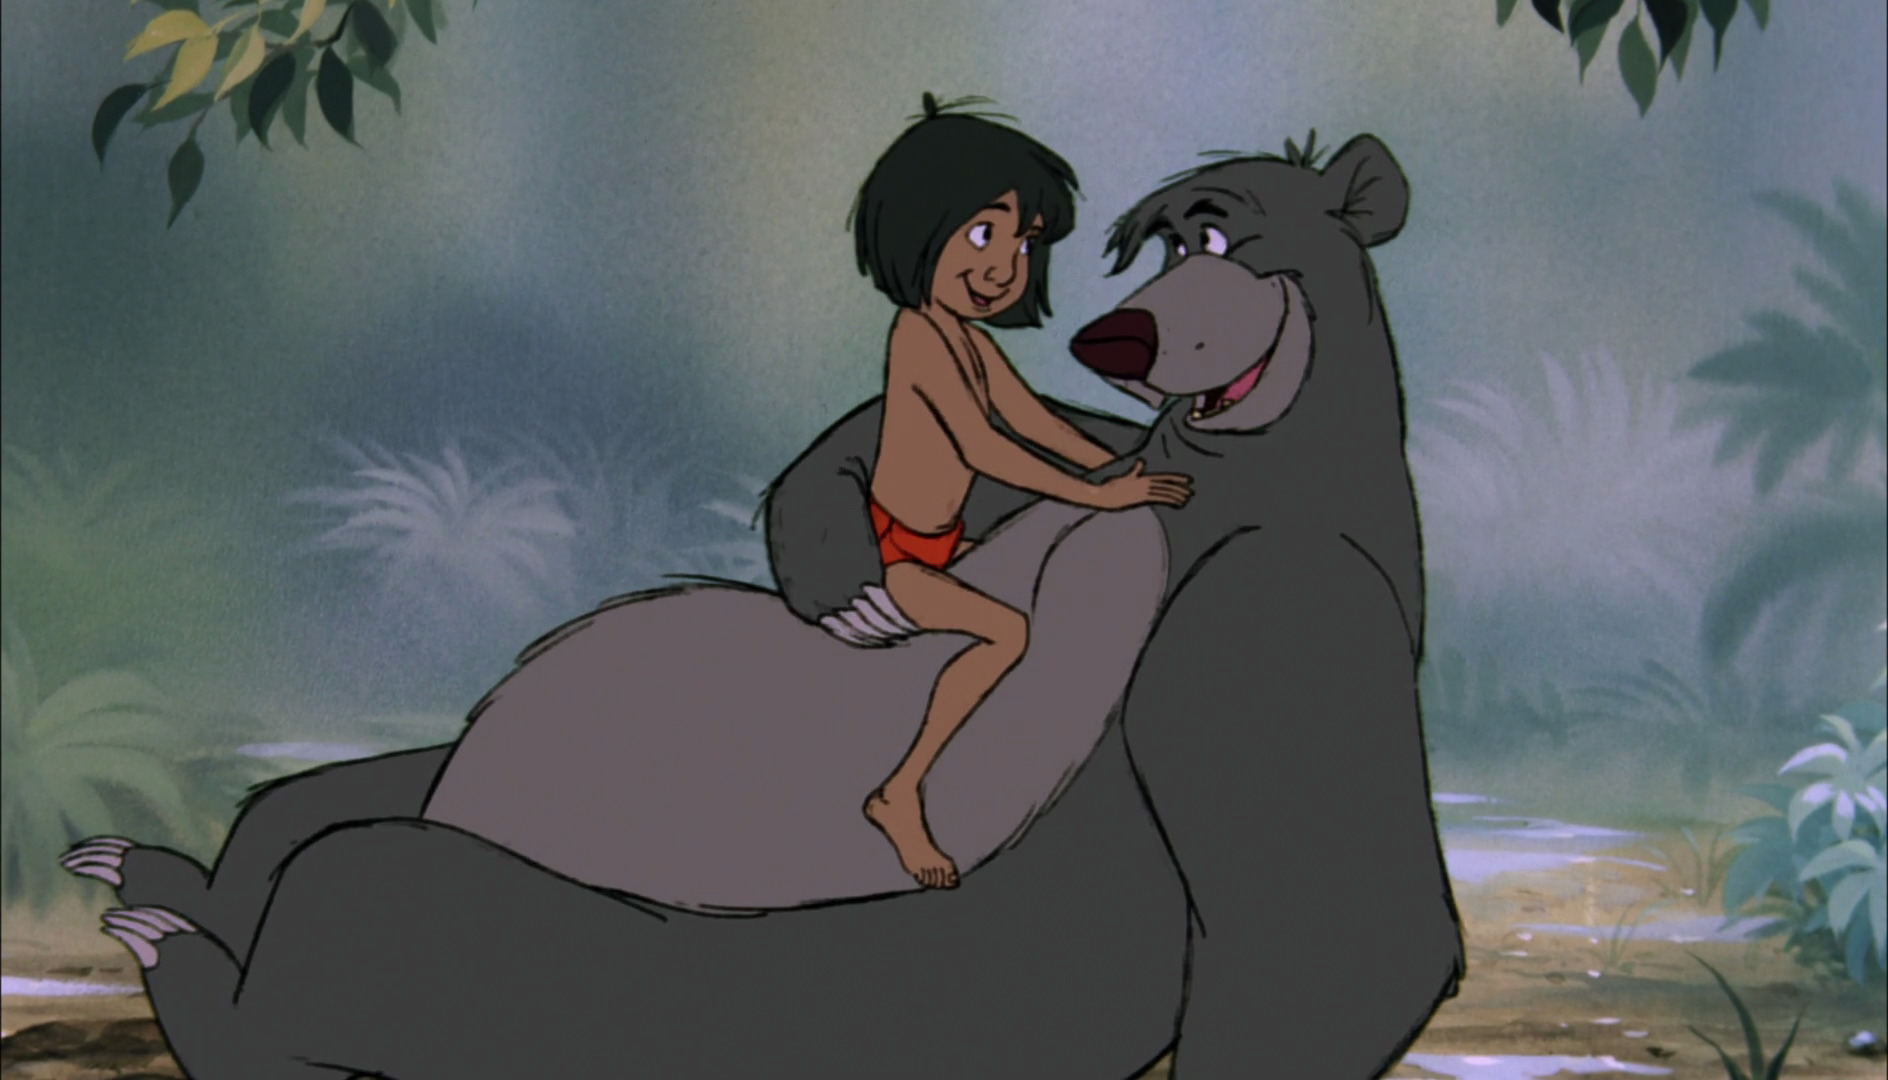 How did audiences react to “The Jungle Book” when it was first released? |  DisneyExaminer